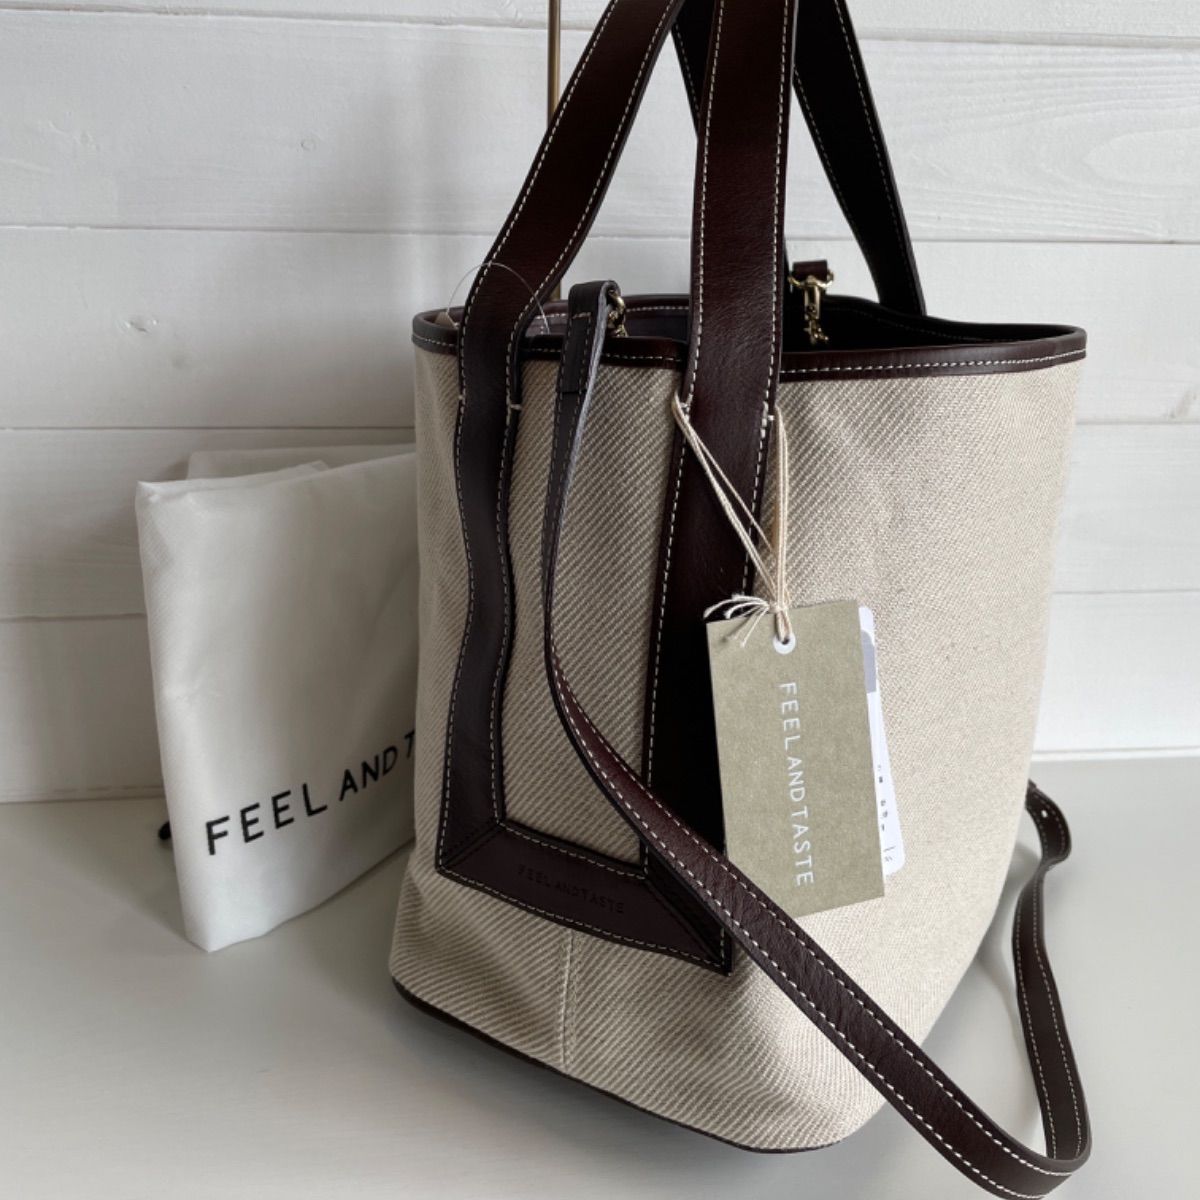 30％OFFアウトレットSALE ANAYI FEEL AND TASTE MARCHE BAG | www ...